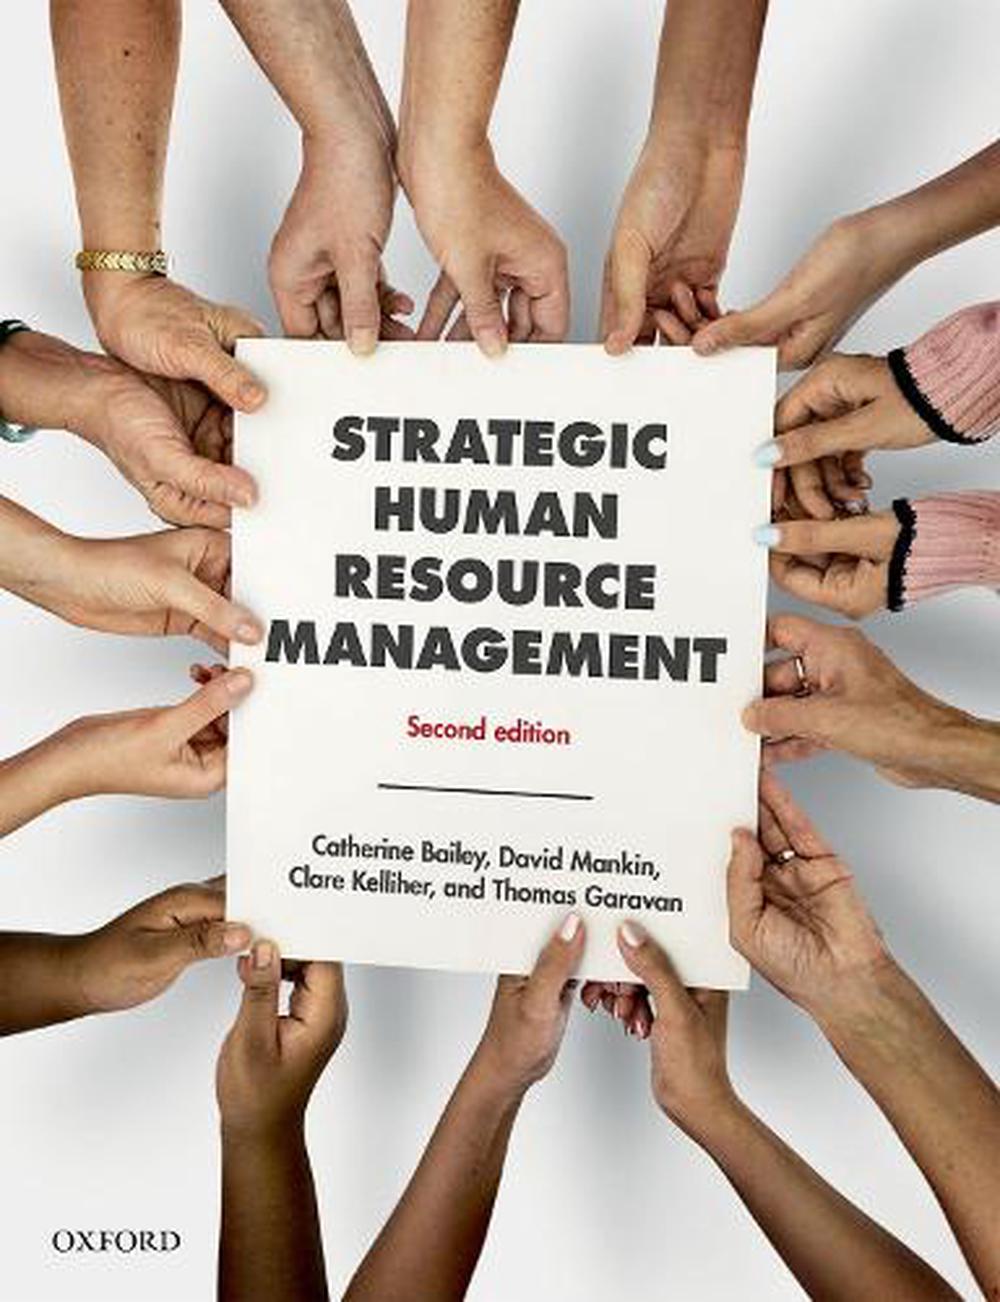 thesis on strategic human resource management